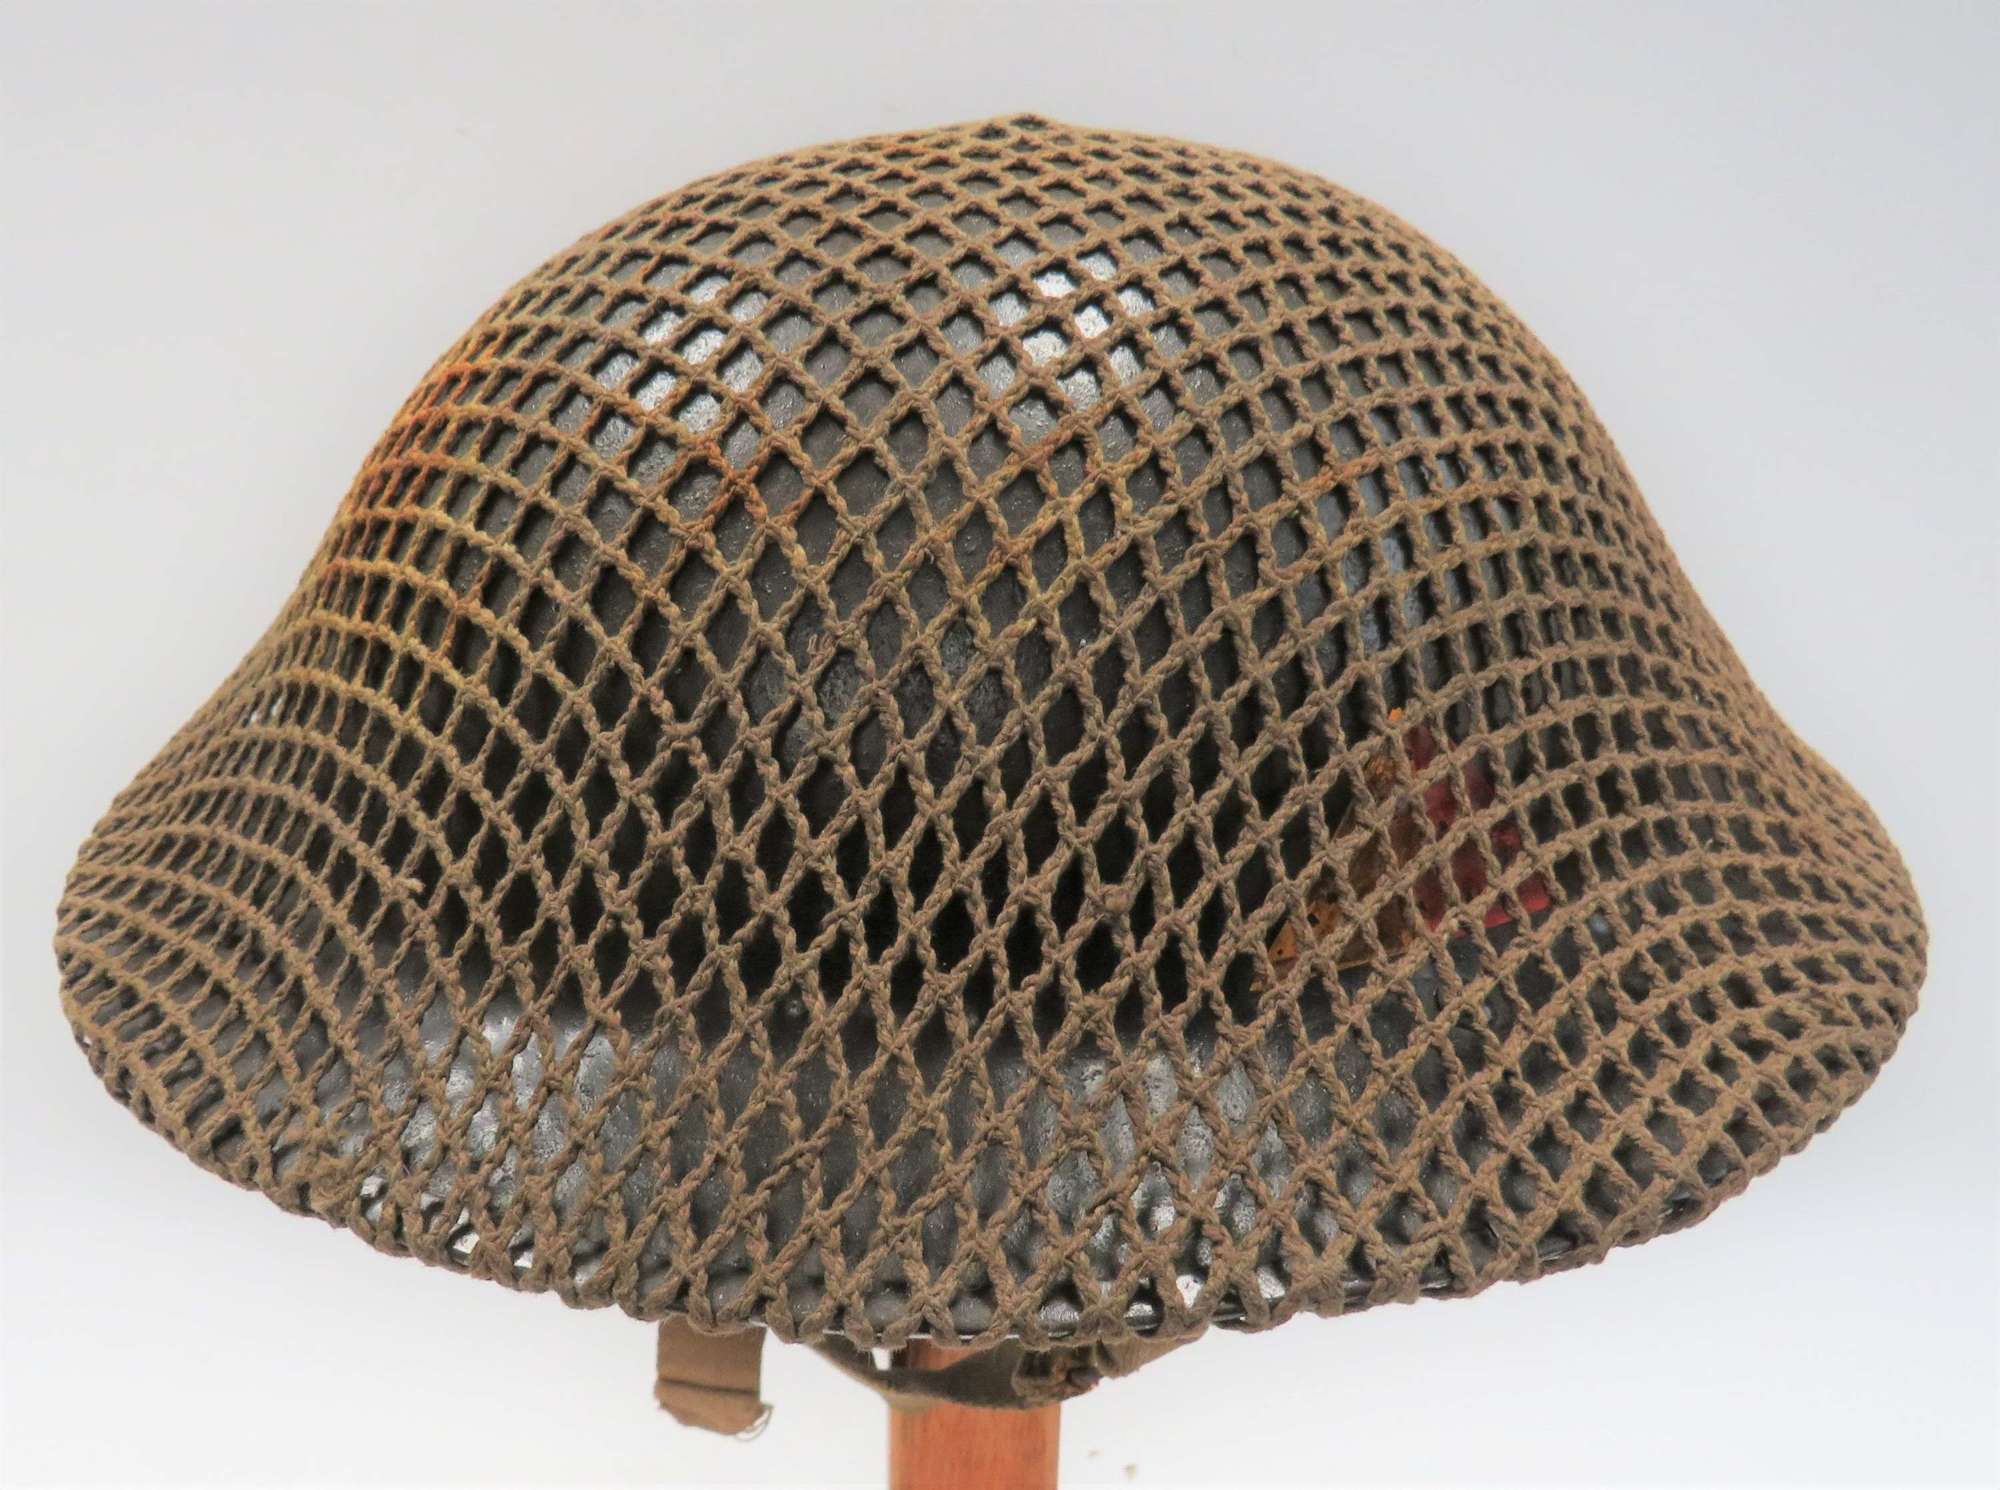 Early War Regimentally Badged , Steel Helmet with cammo cover